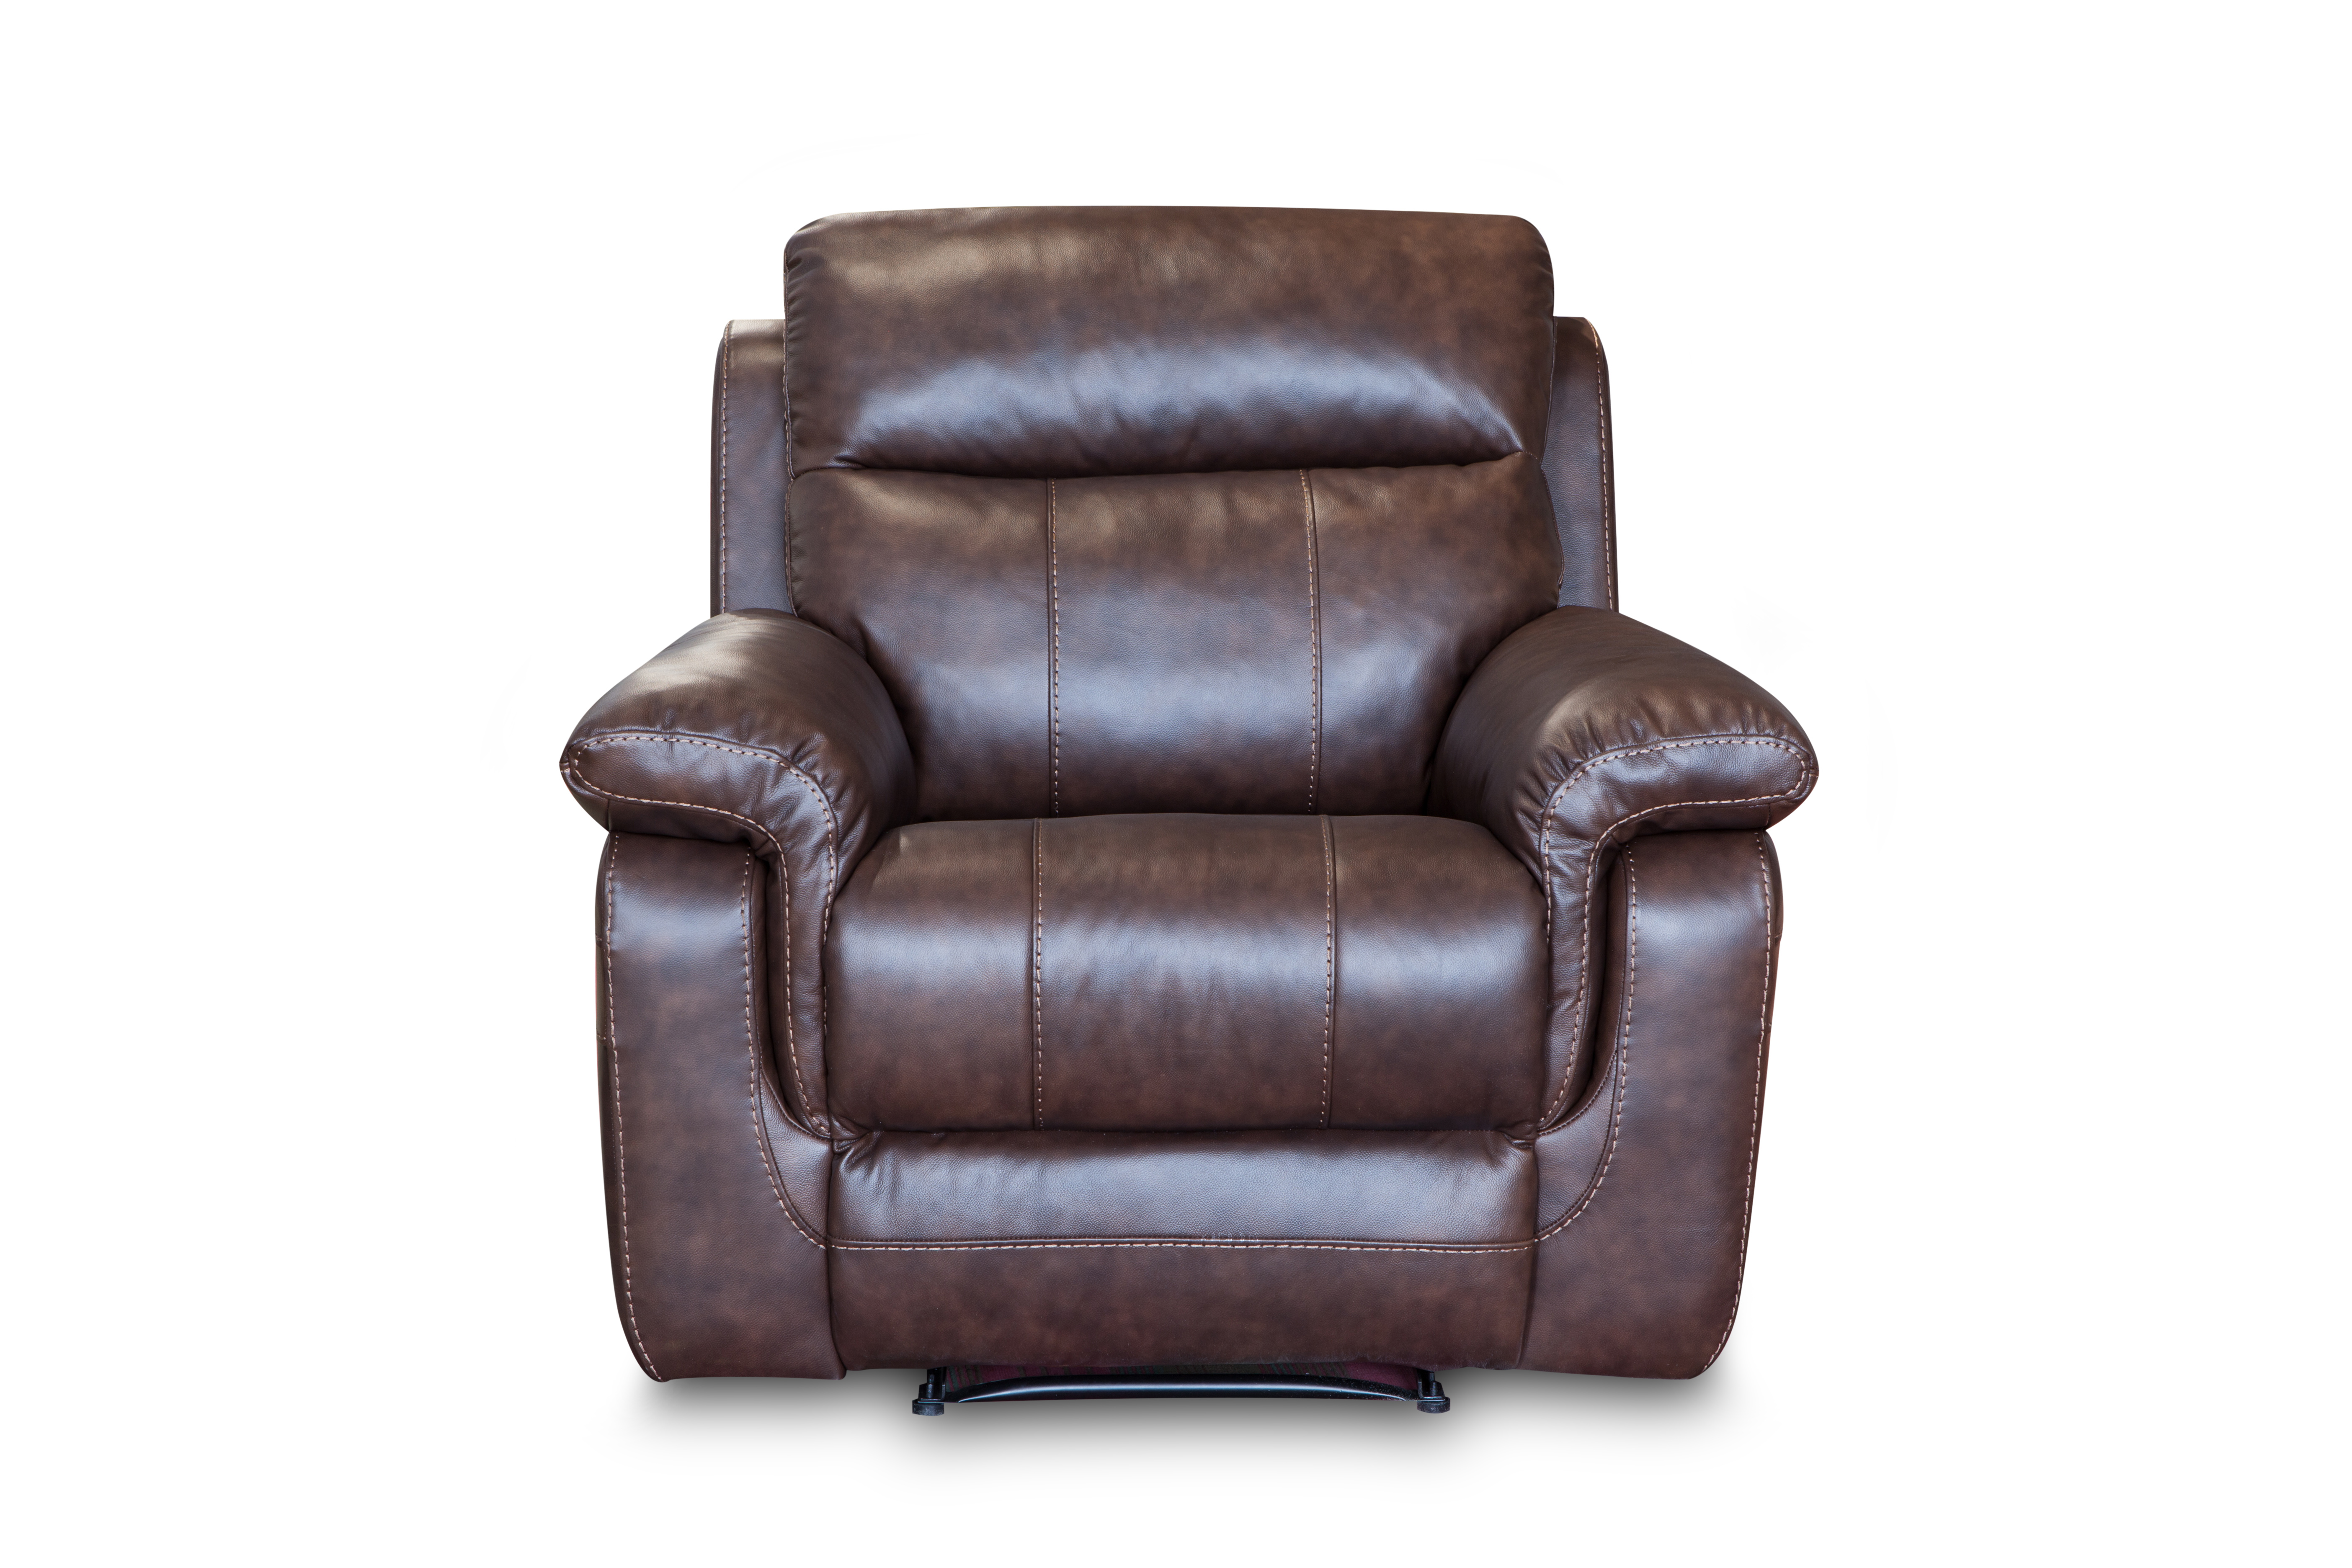 China Wholesale Price Leather Rocker Sofa Furniture Stores Hot